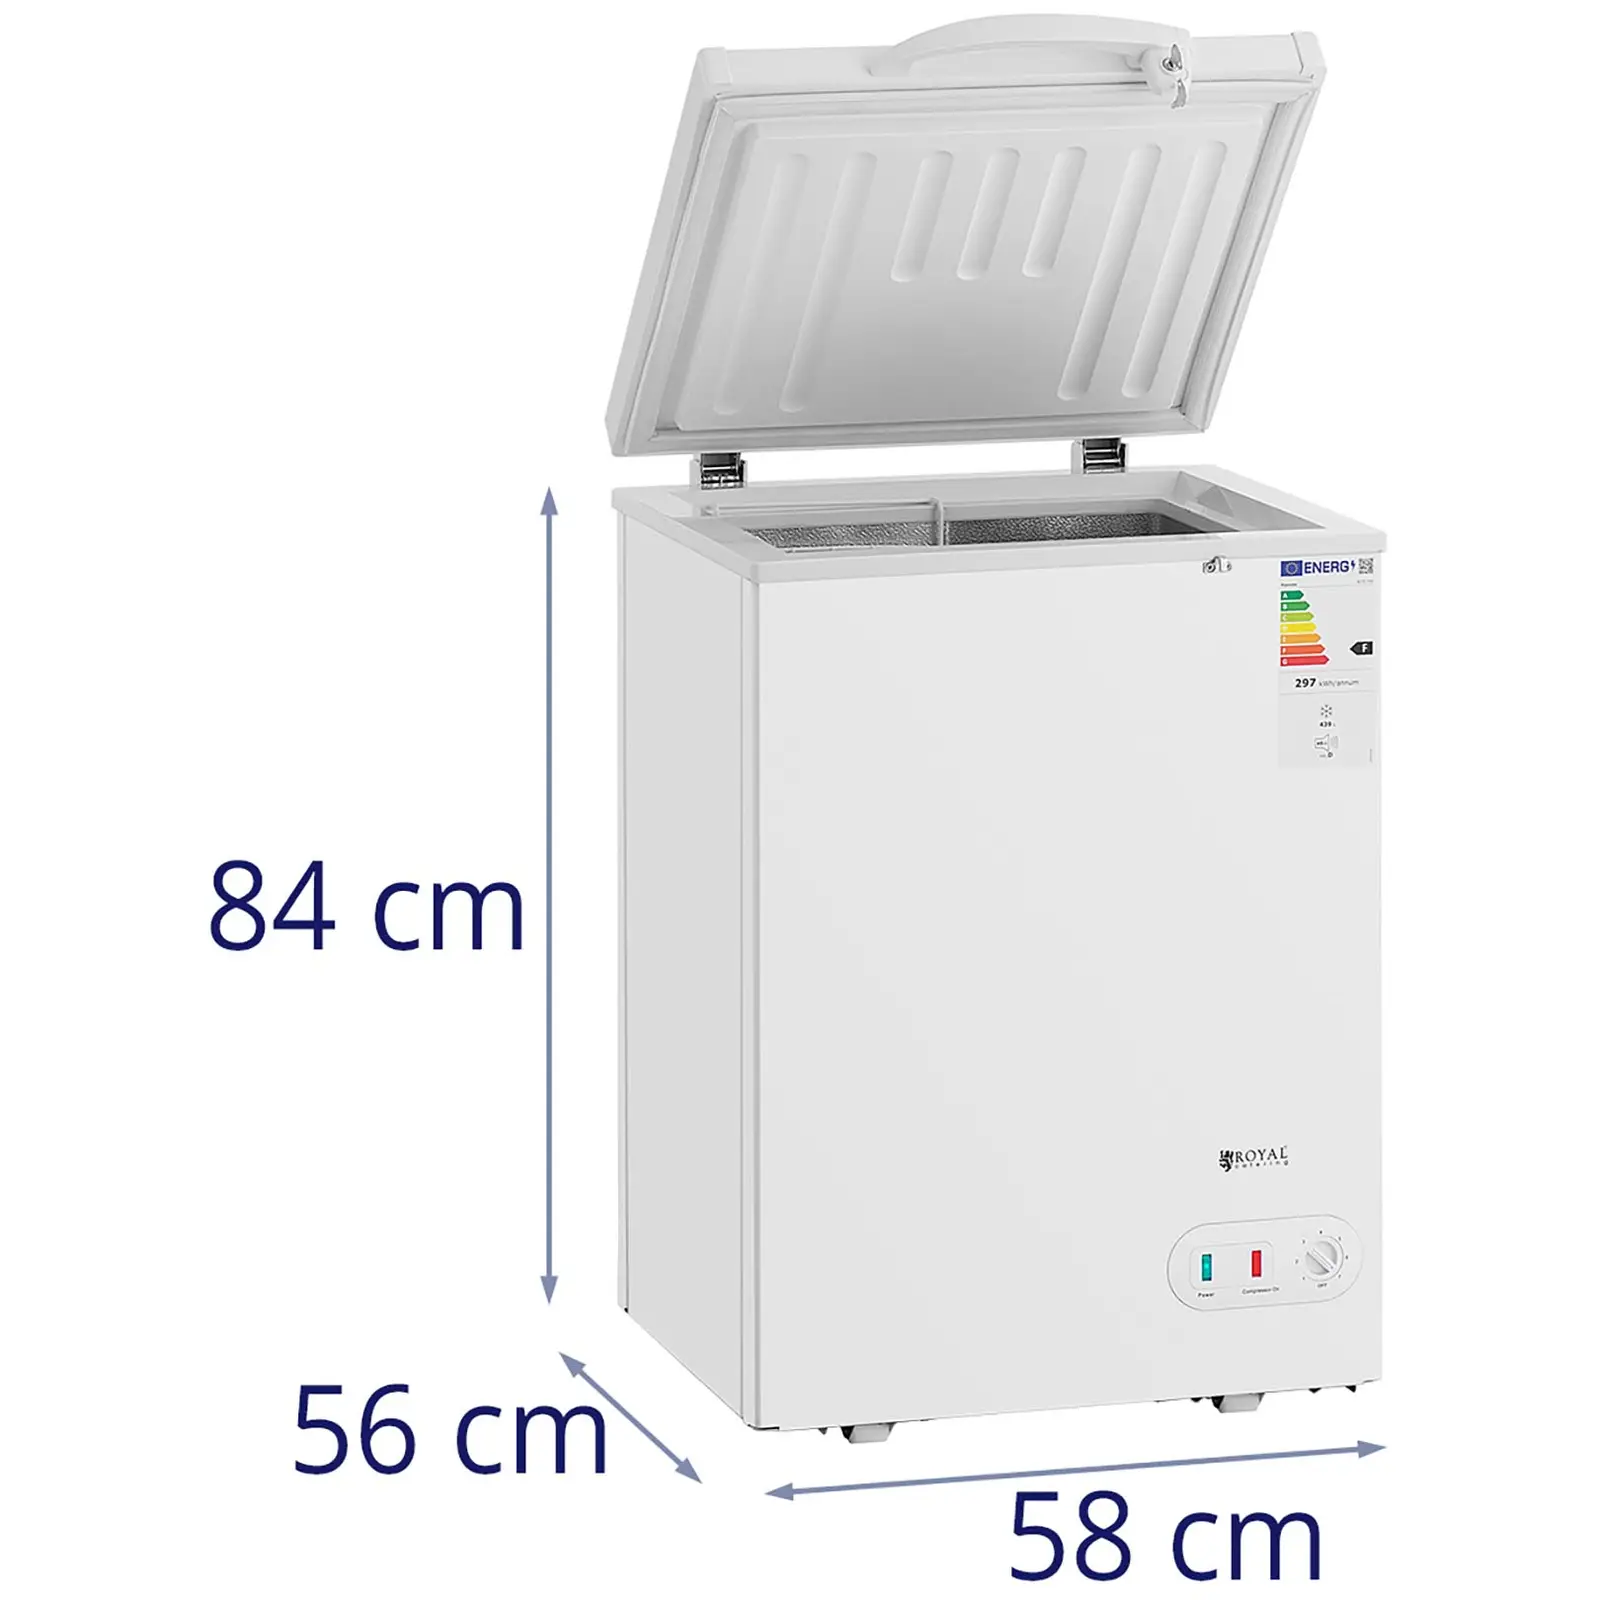 Chest Freezer - 97 L - Royal Catering - 63 W